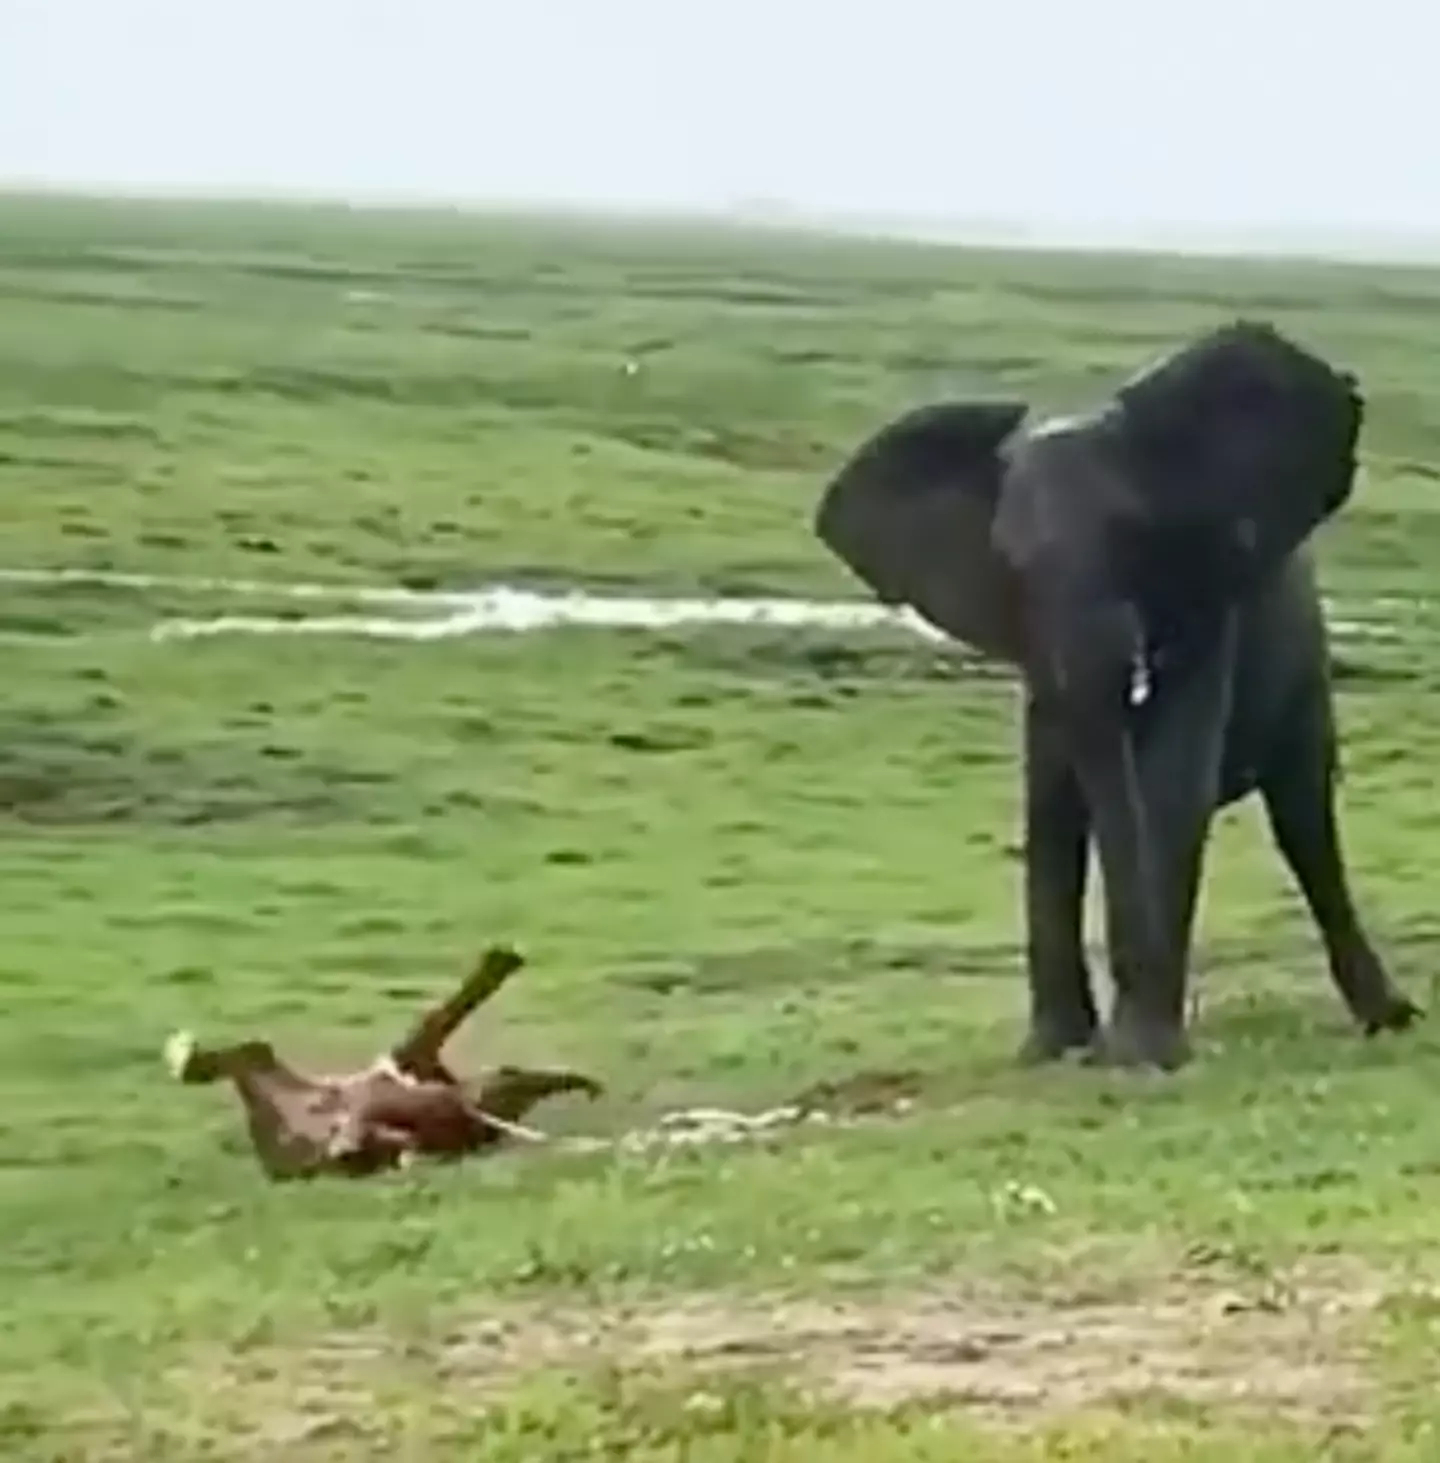 A heartwarming moment of an elephant giving birth has gone viral on social media.